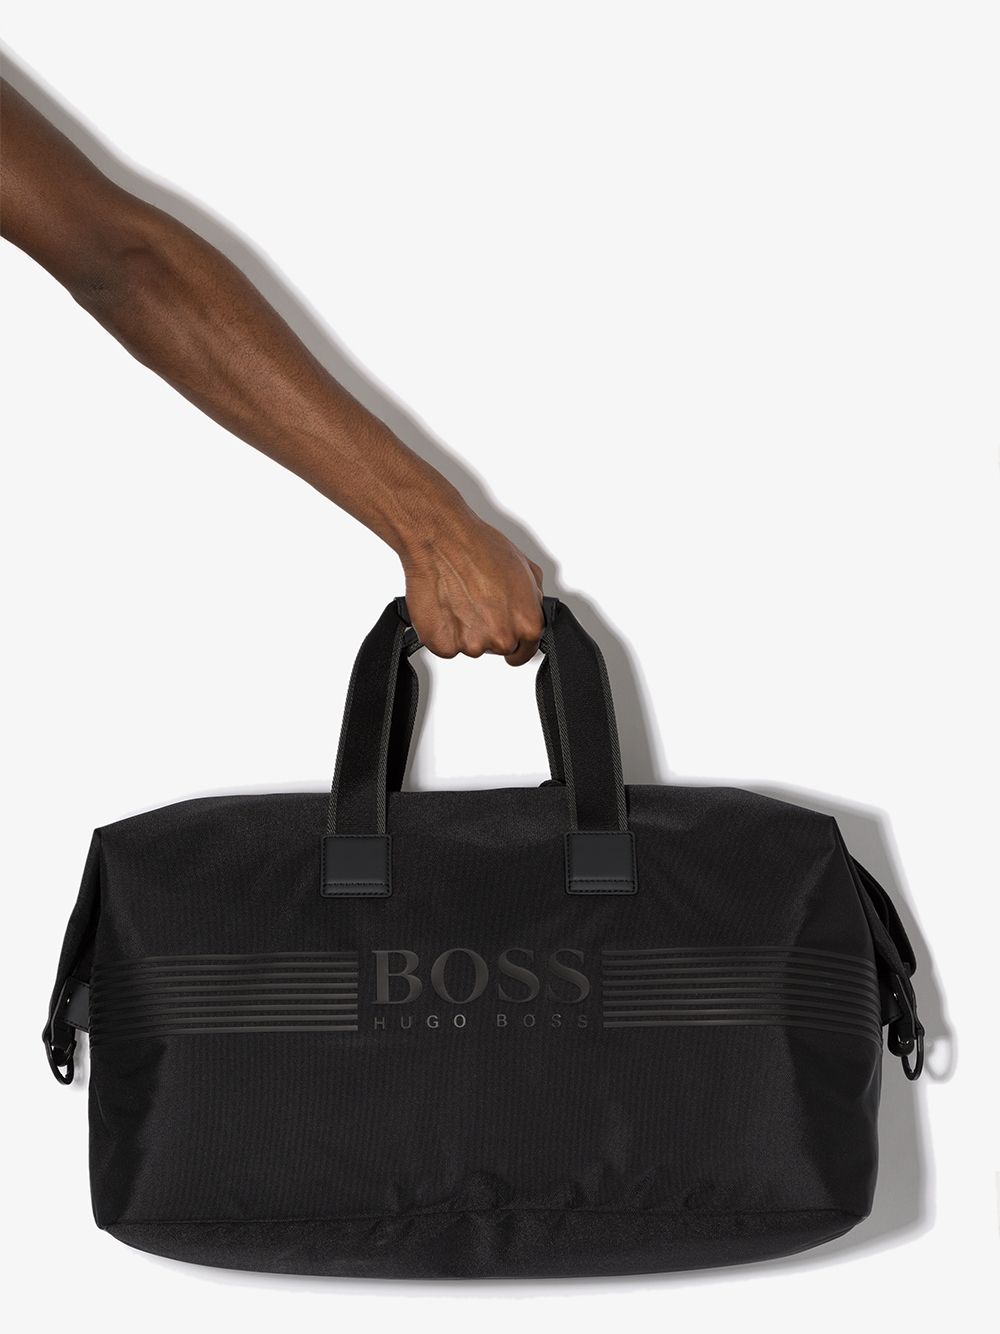 Shop black BOSS Pixel logo holdall with 